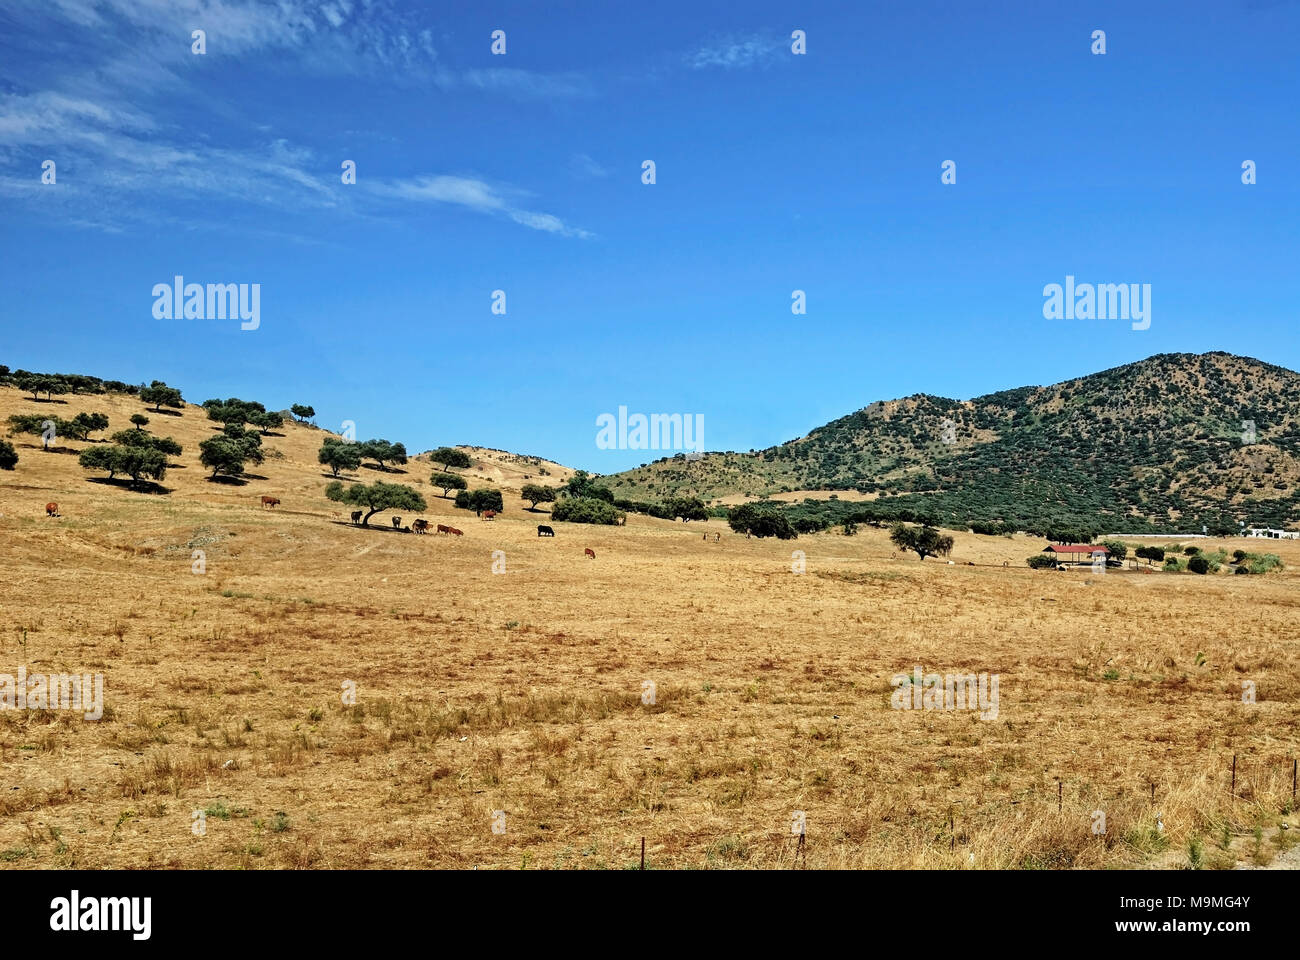 A Cattle Ranch in Central Spain Stock Photo